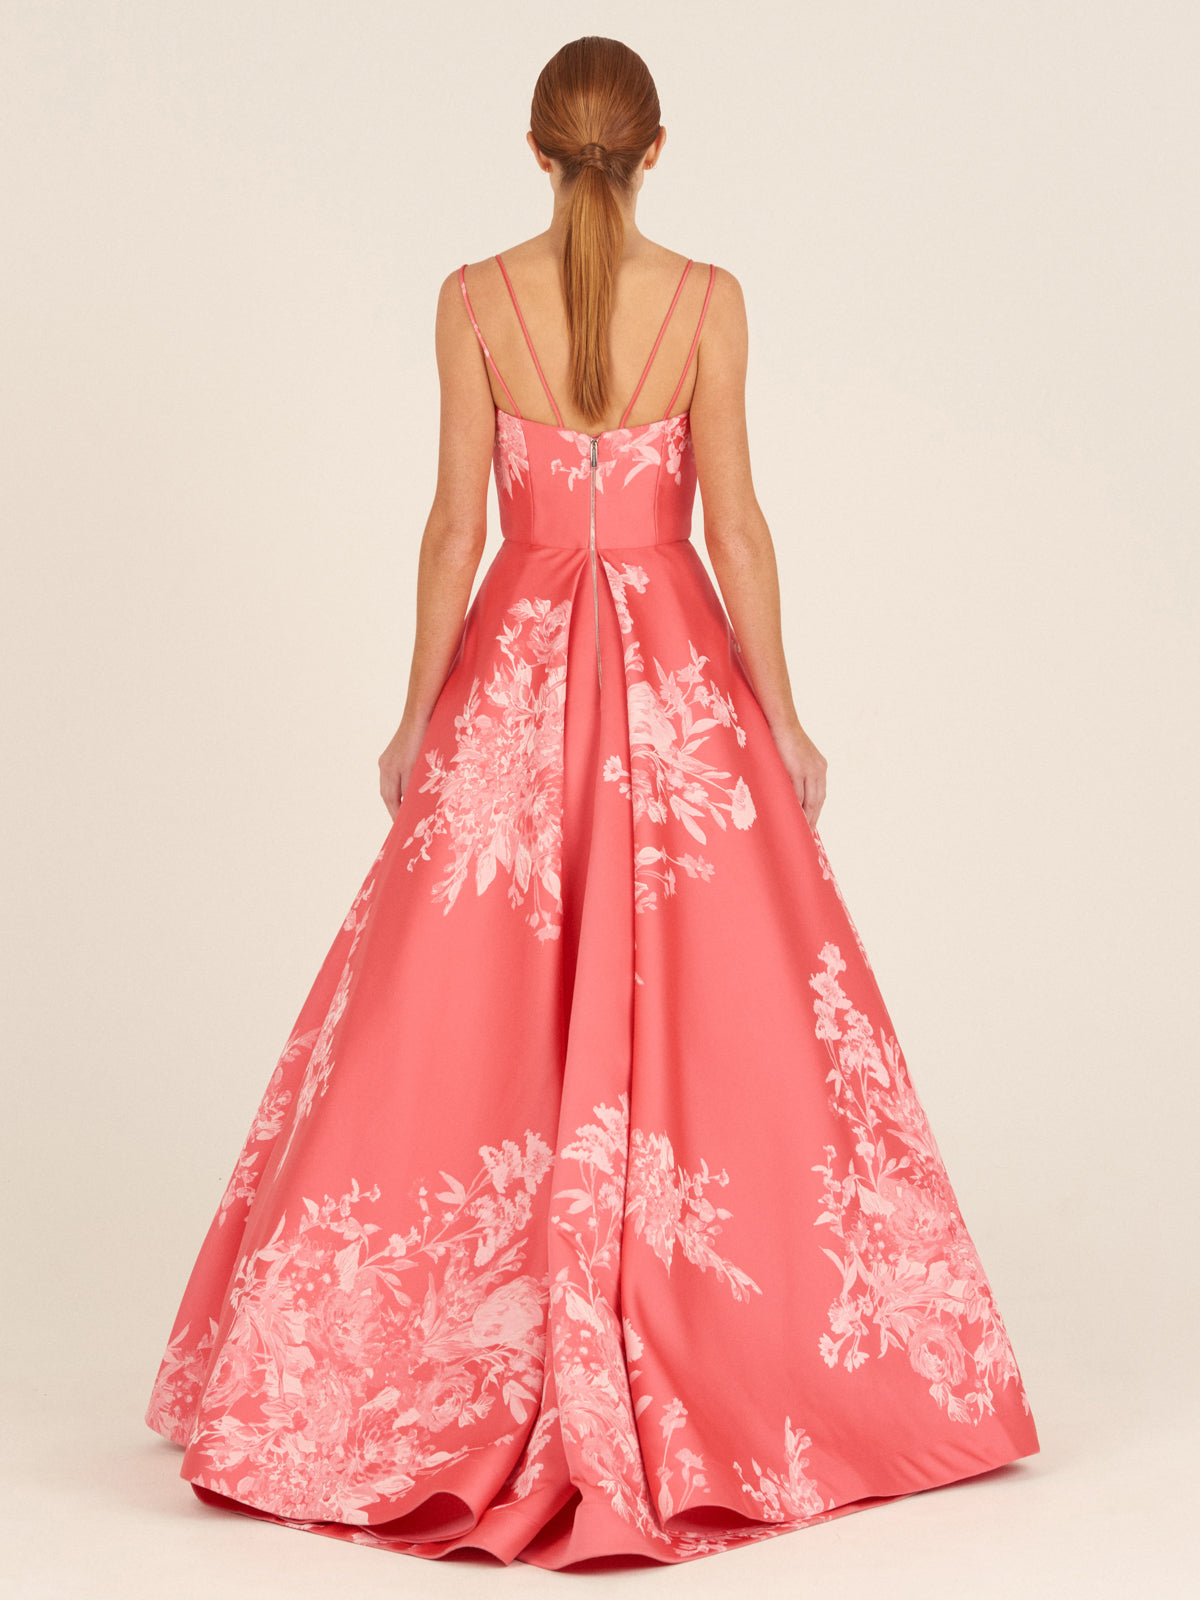 Strapless salmon Julene dress with white floral embroidery design.